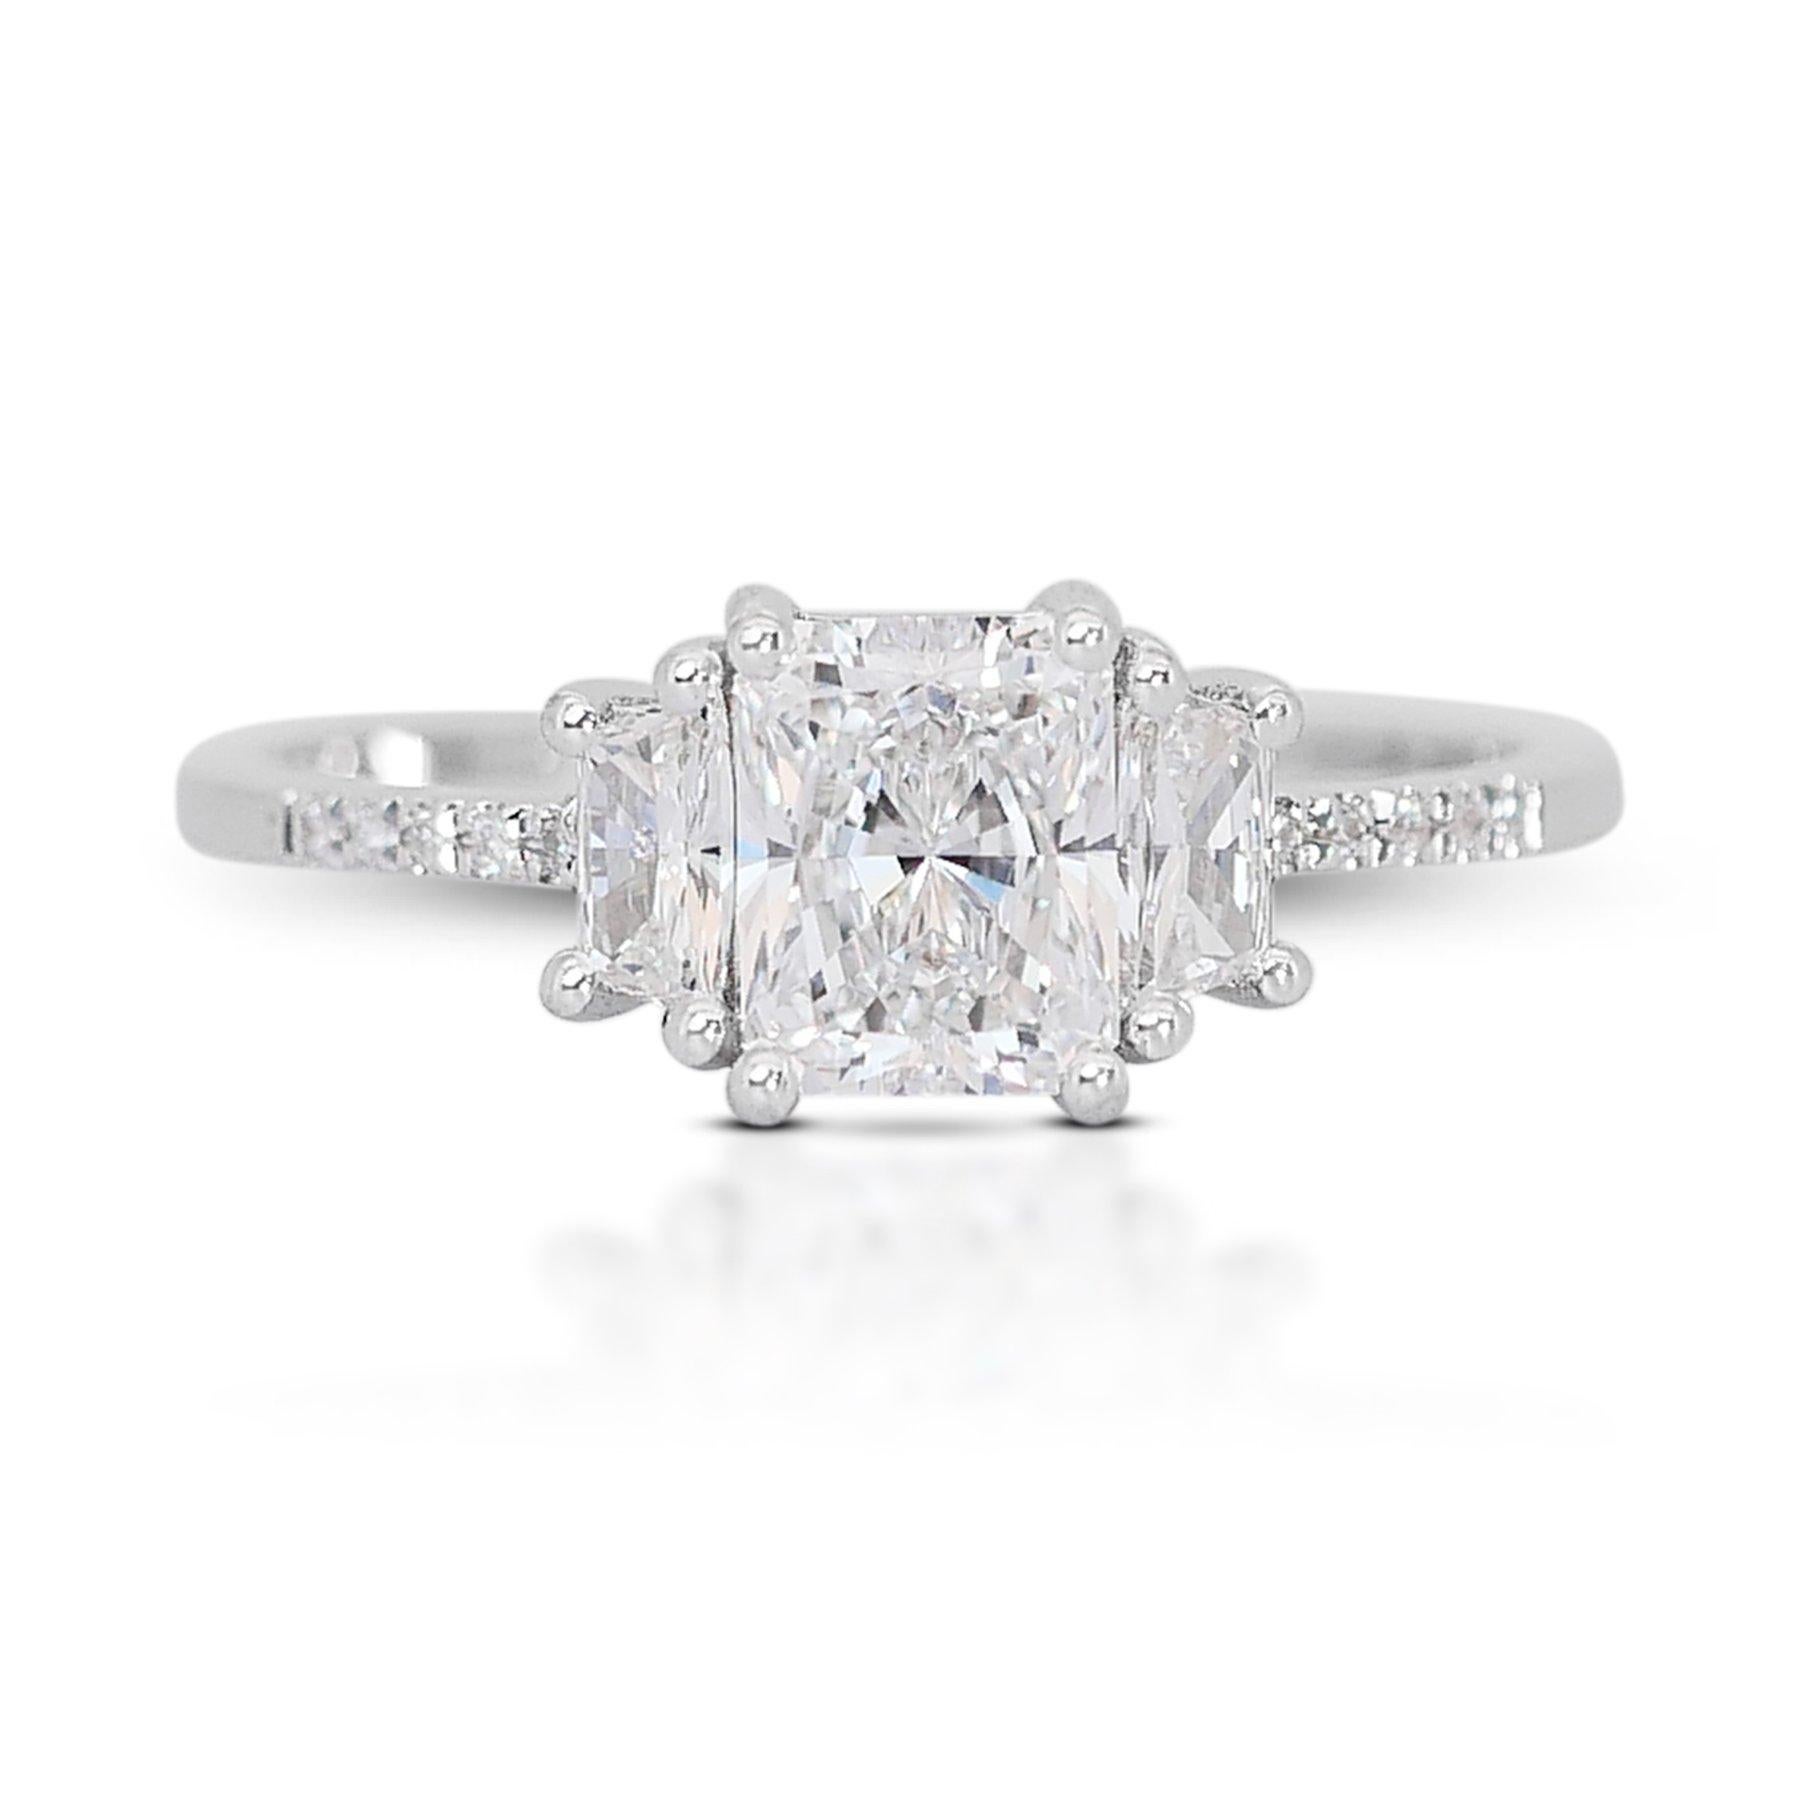 Dazzling 1.32ct Diamond 3-Stone Ring in 18K White Gold - GIA Certified For Sale 3